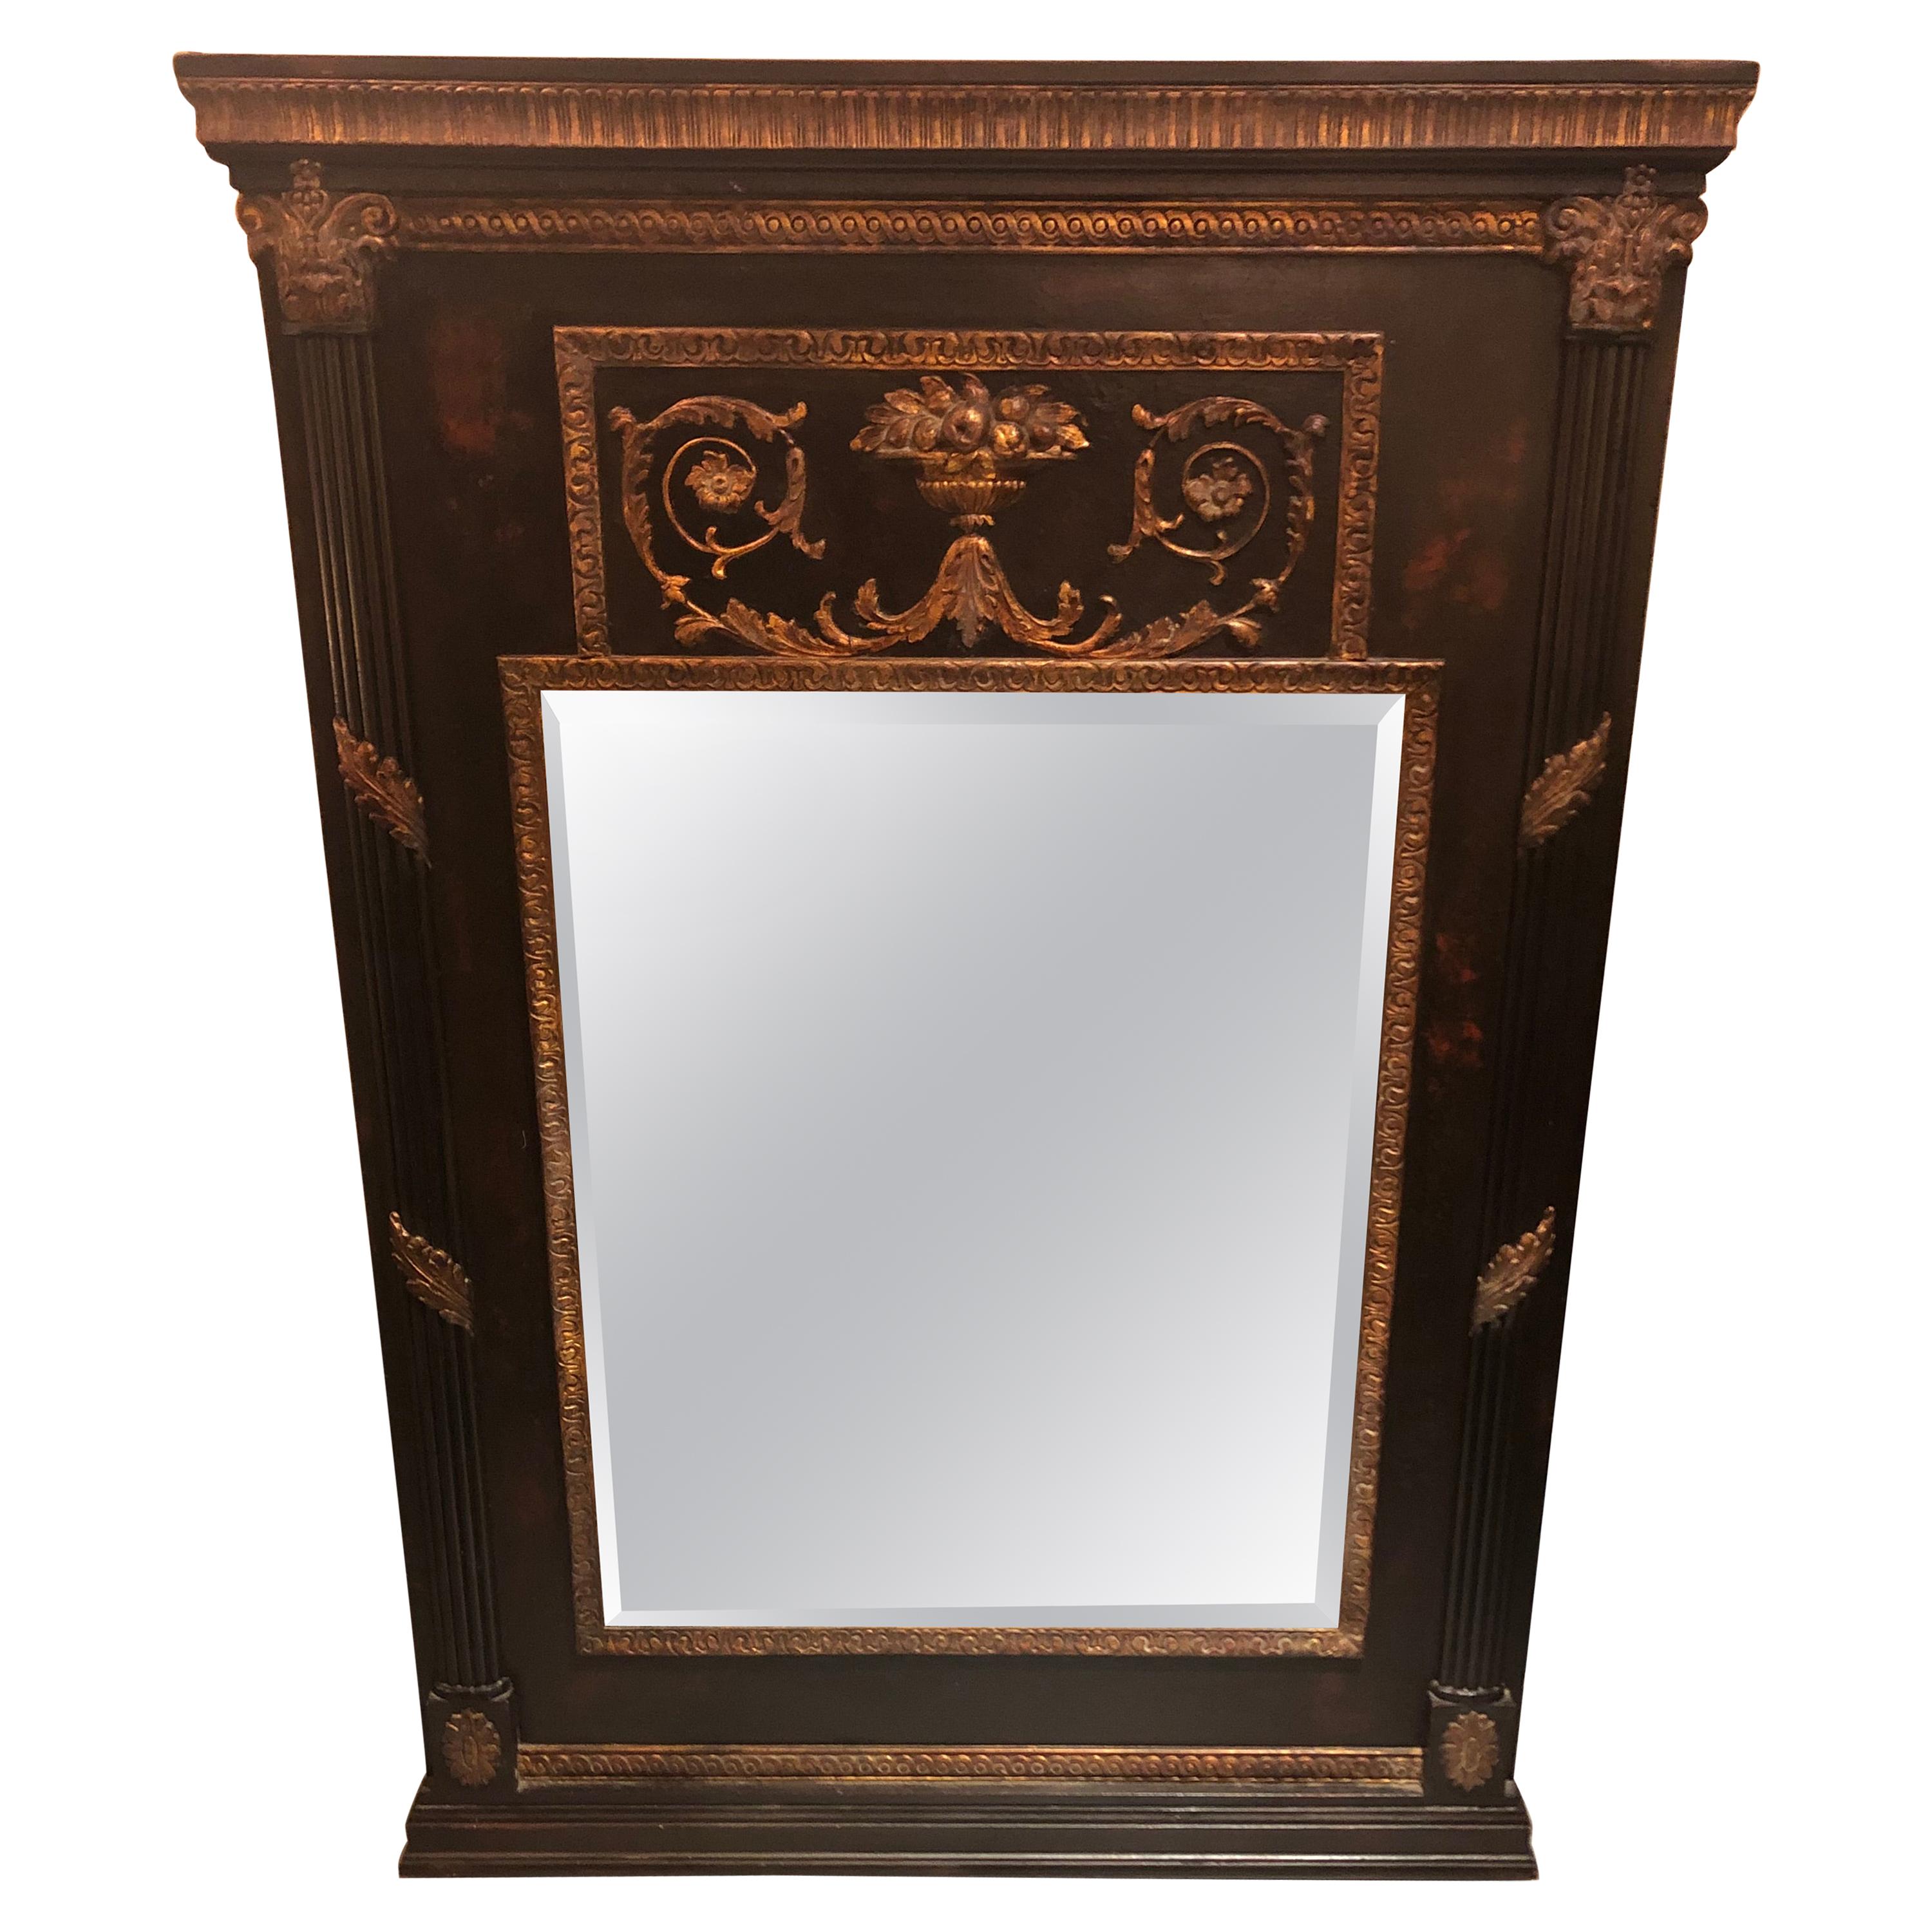 Dramatic Black & Gold Neoclassical Style Trumeau Mirror